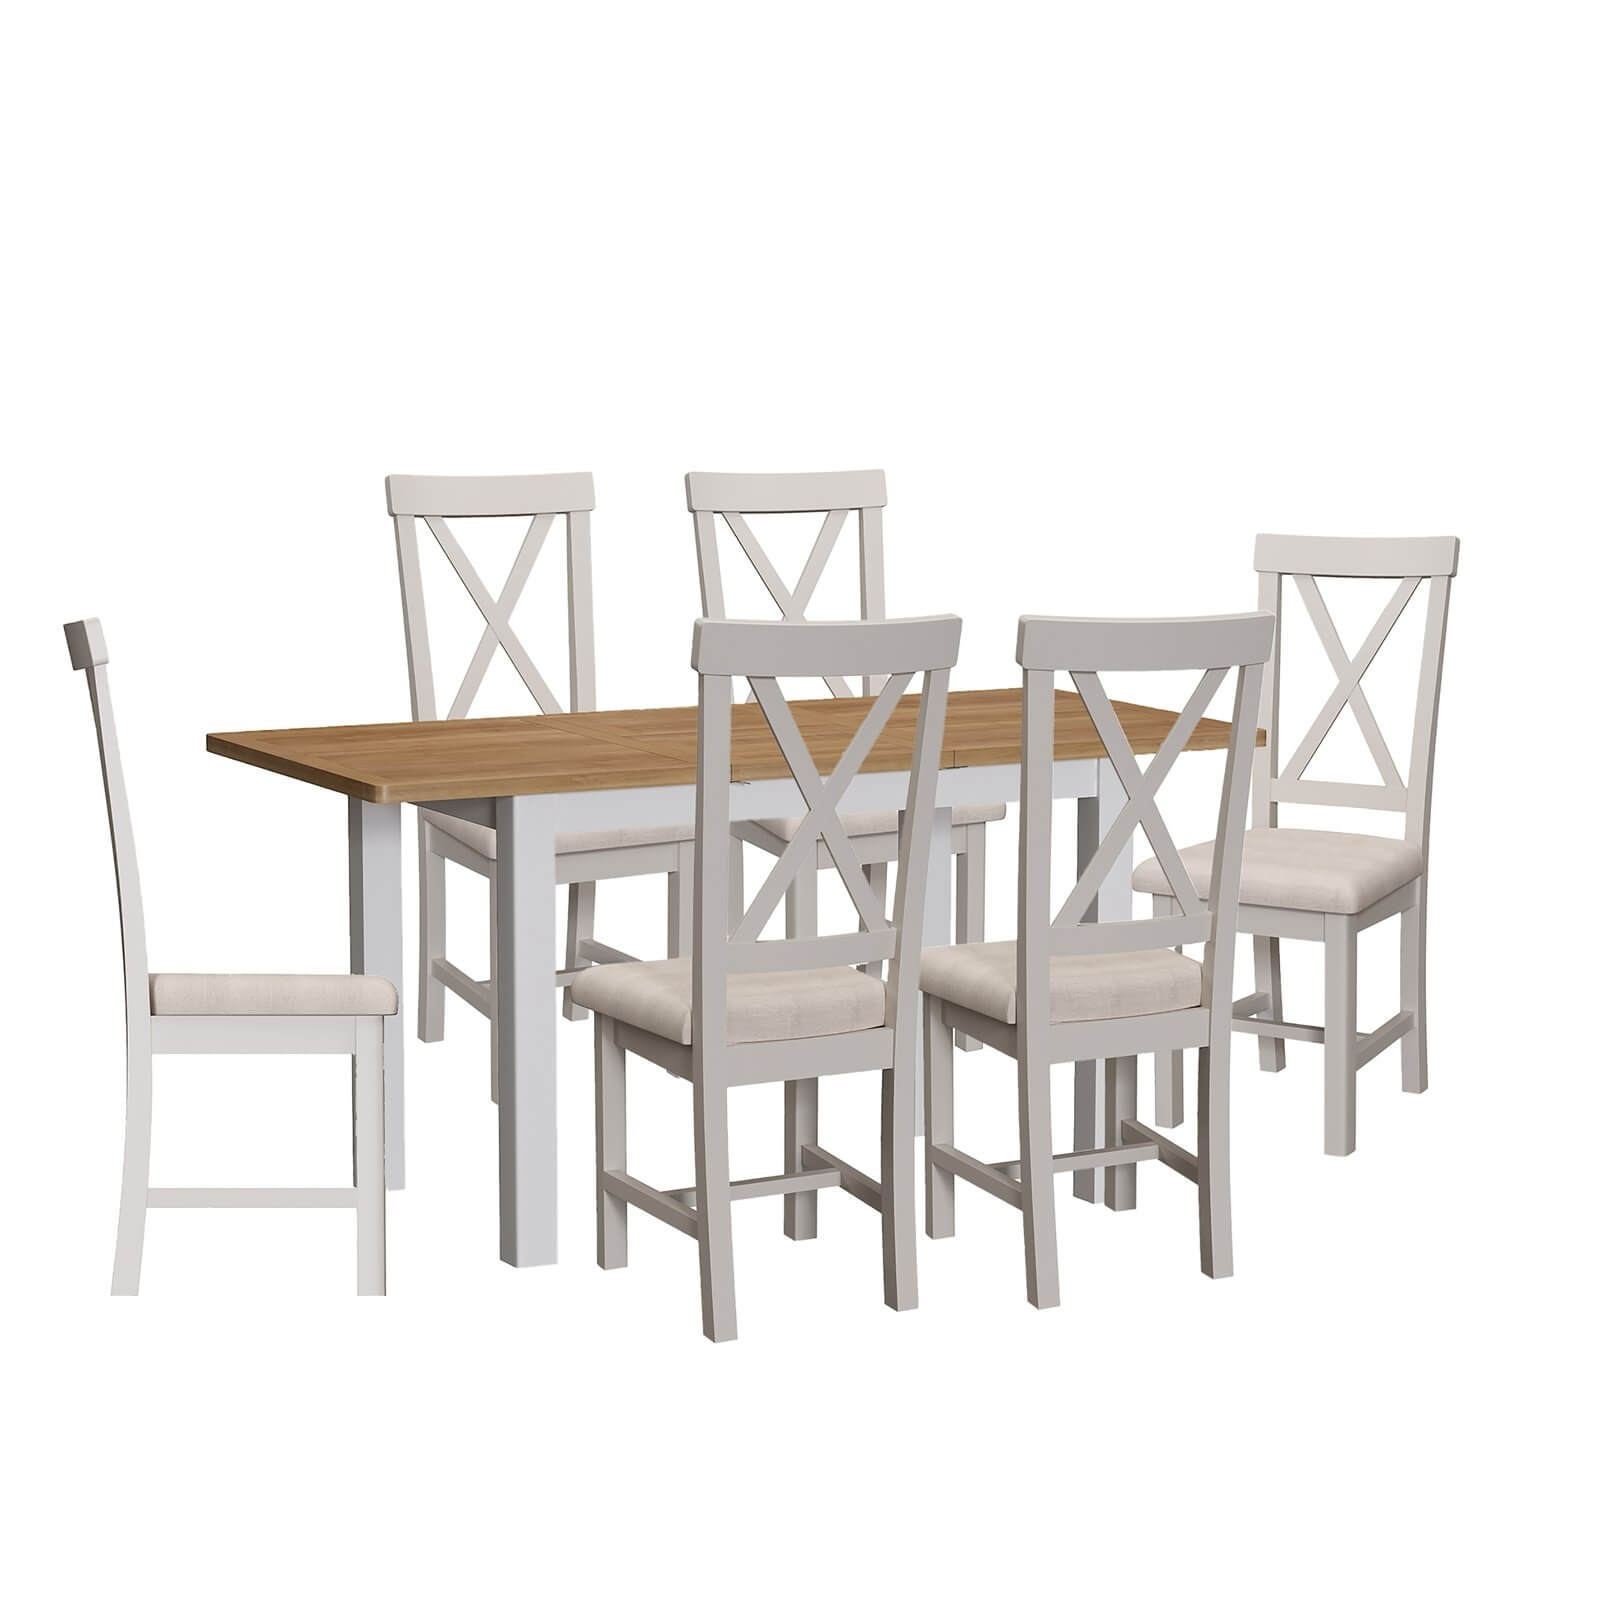 Padstow 1.2m Extending 6 Seater Dining Set - Grey